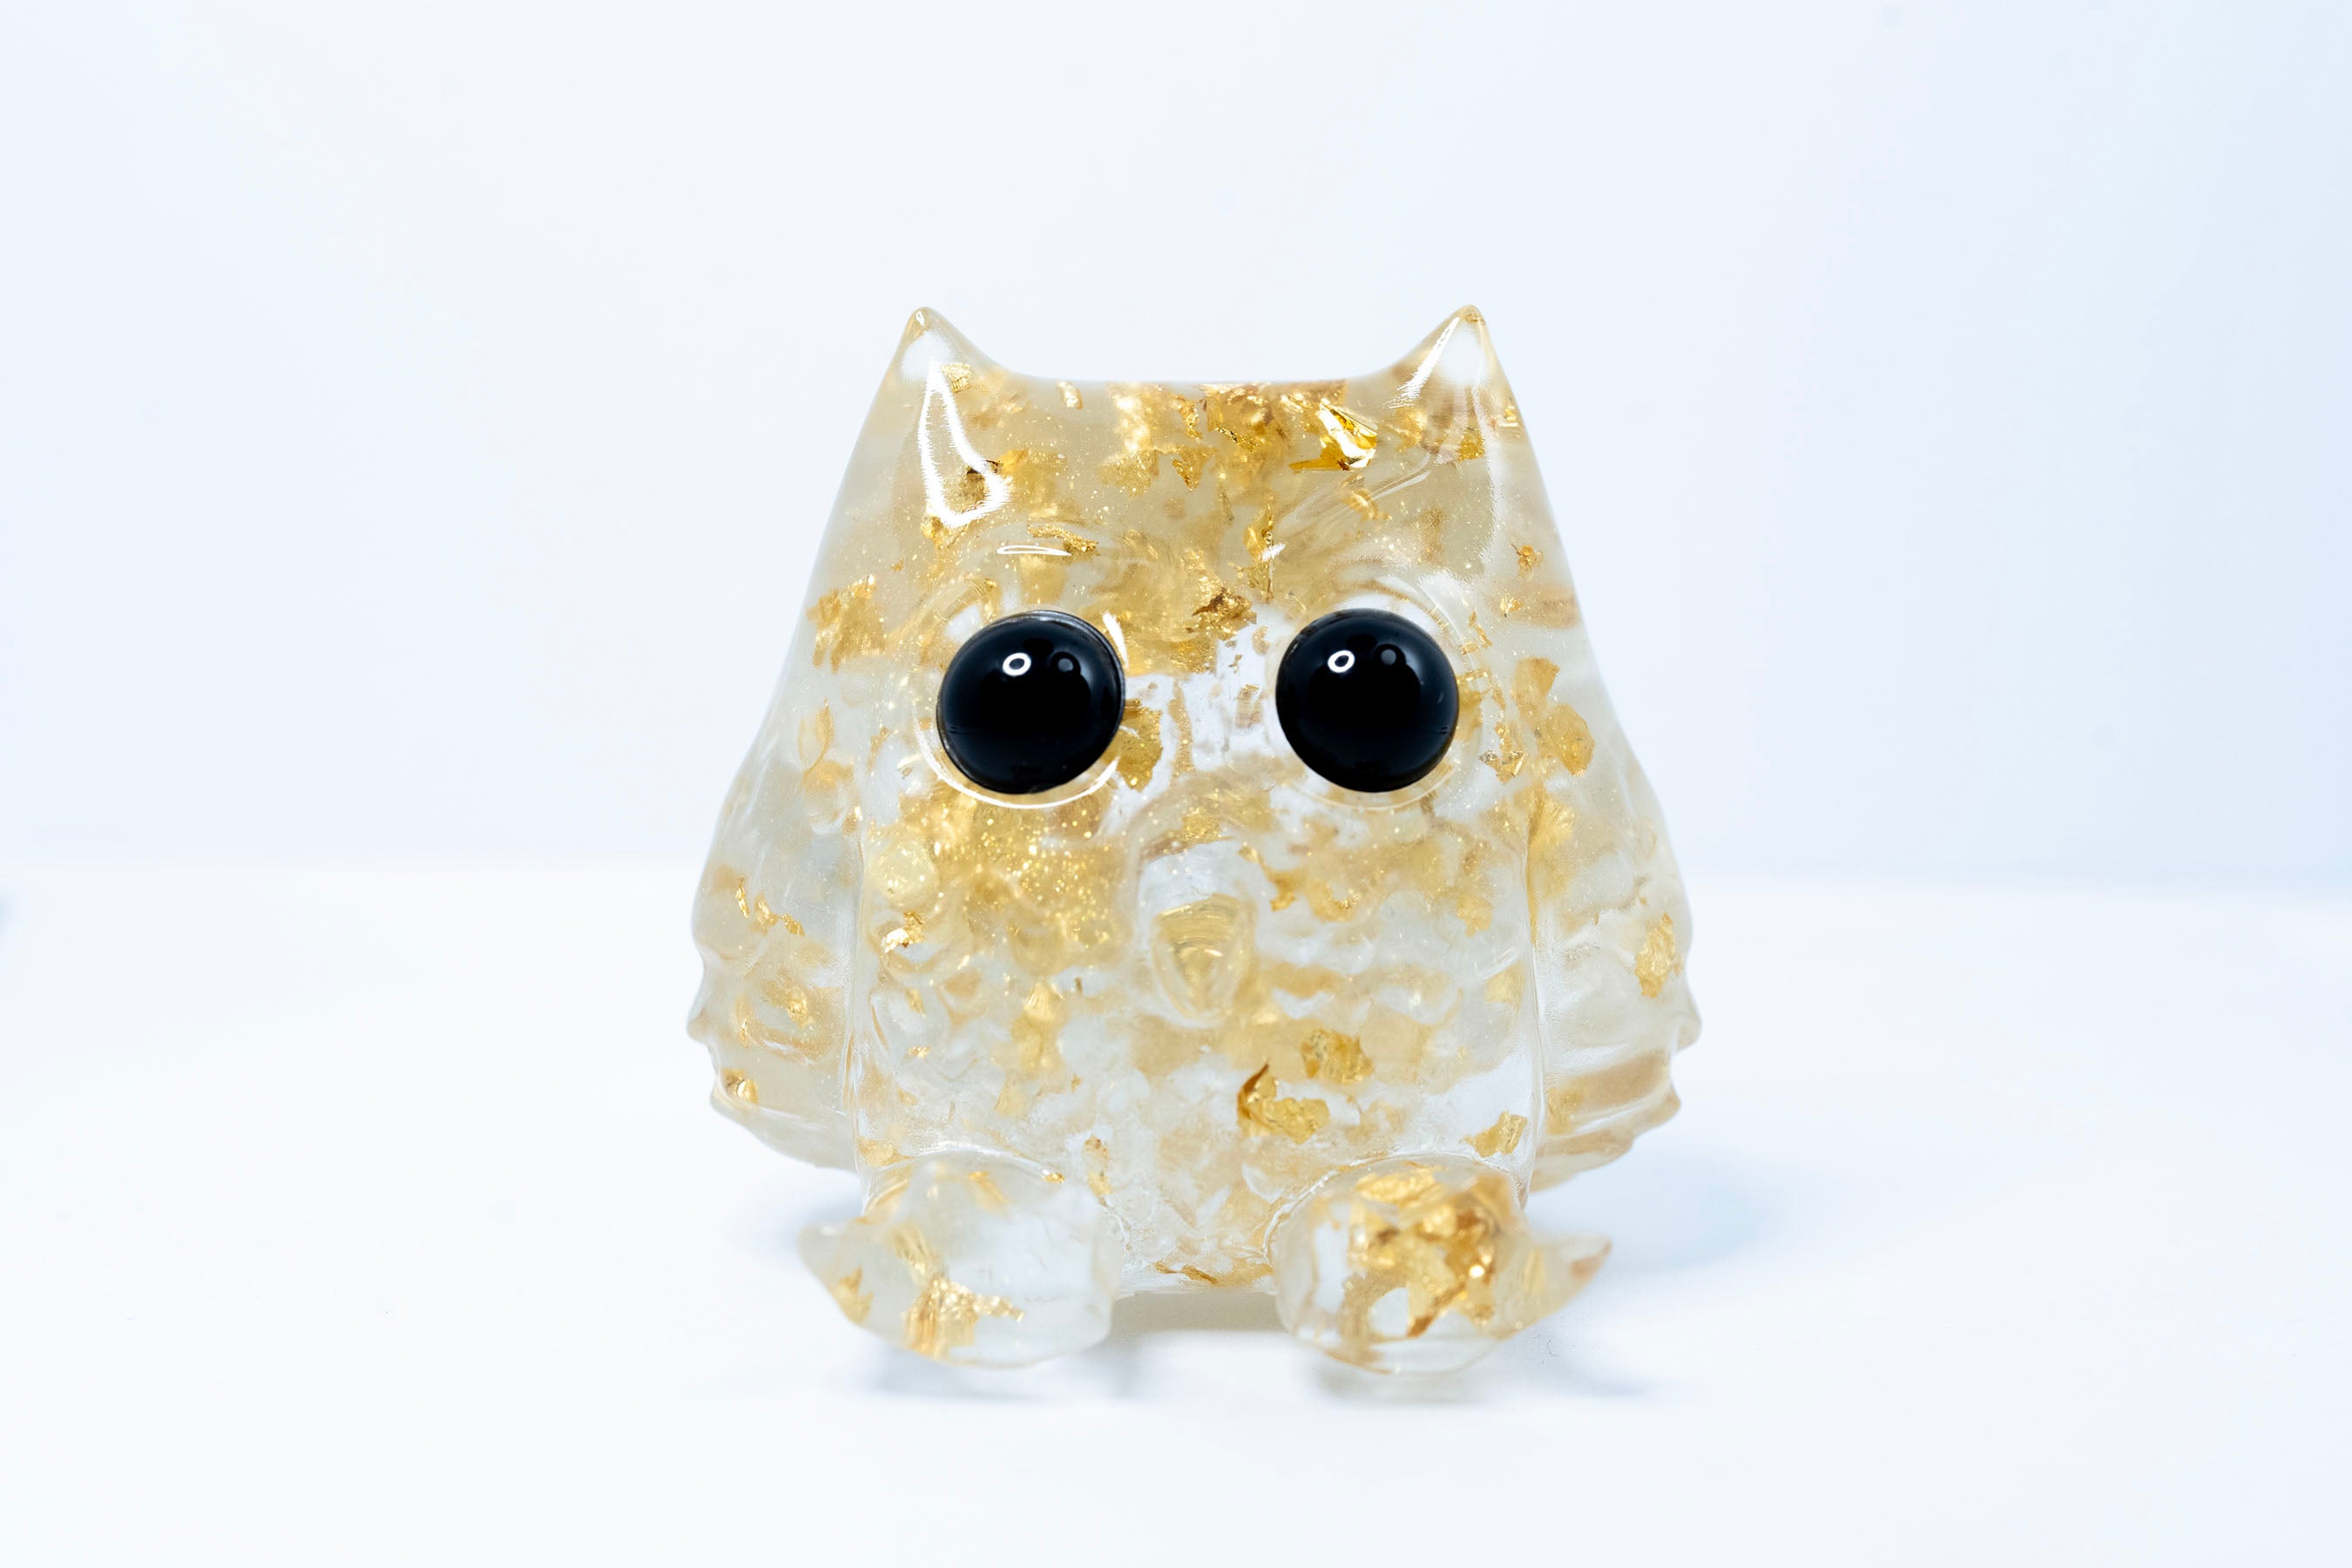 Resin owl figurine, 2.3cm, limited edition of 5 pieces, ships randomly. From House of Wyze. Associated with Strangecat Toys, a blind box and art toy store.